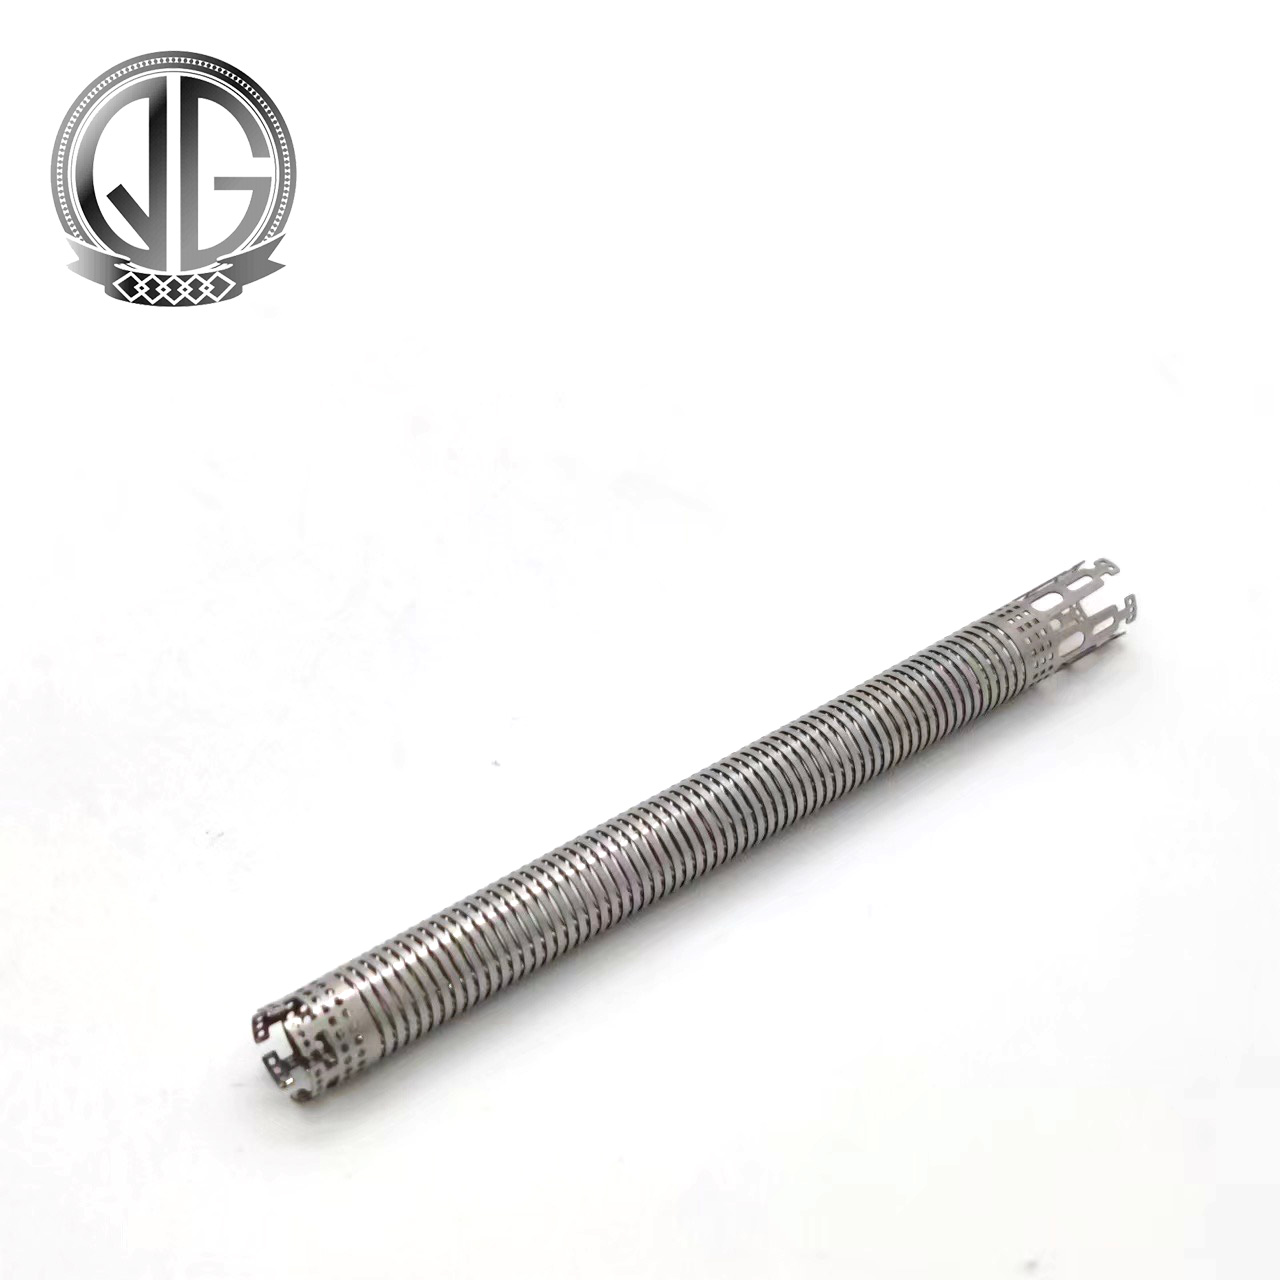 Medical Grade Laser Cut Stainless Steel Hypo Tube Featured Image